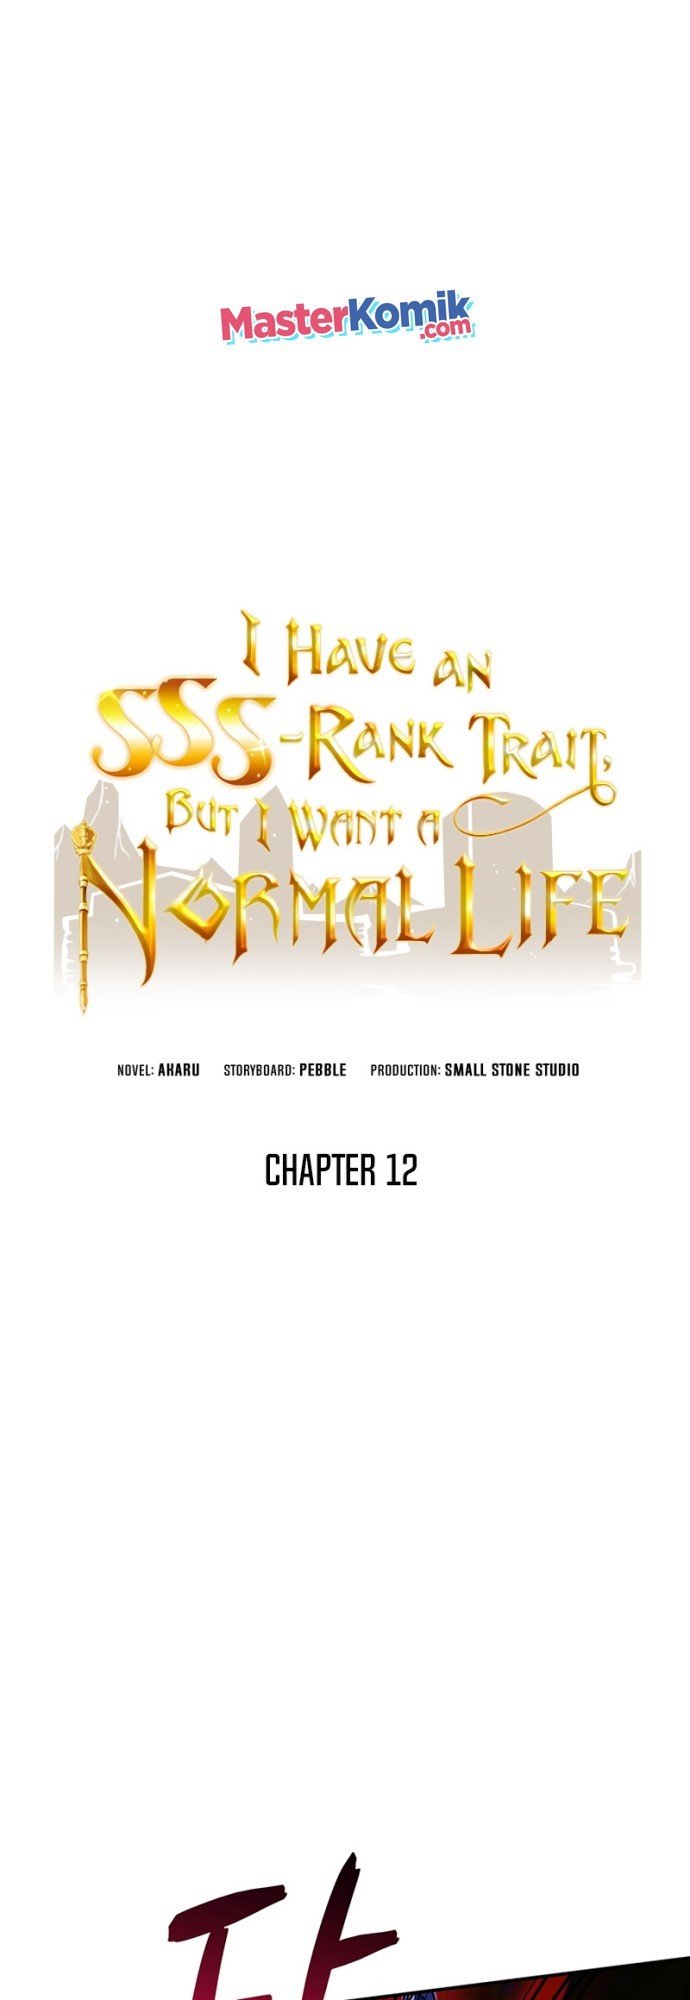 I have an SSS-rank Trait, but I want a Normal Life Chapter 12